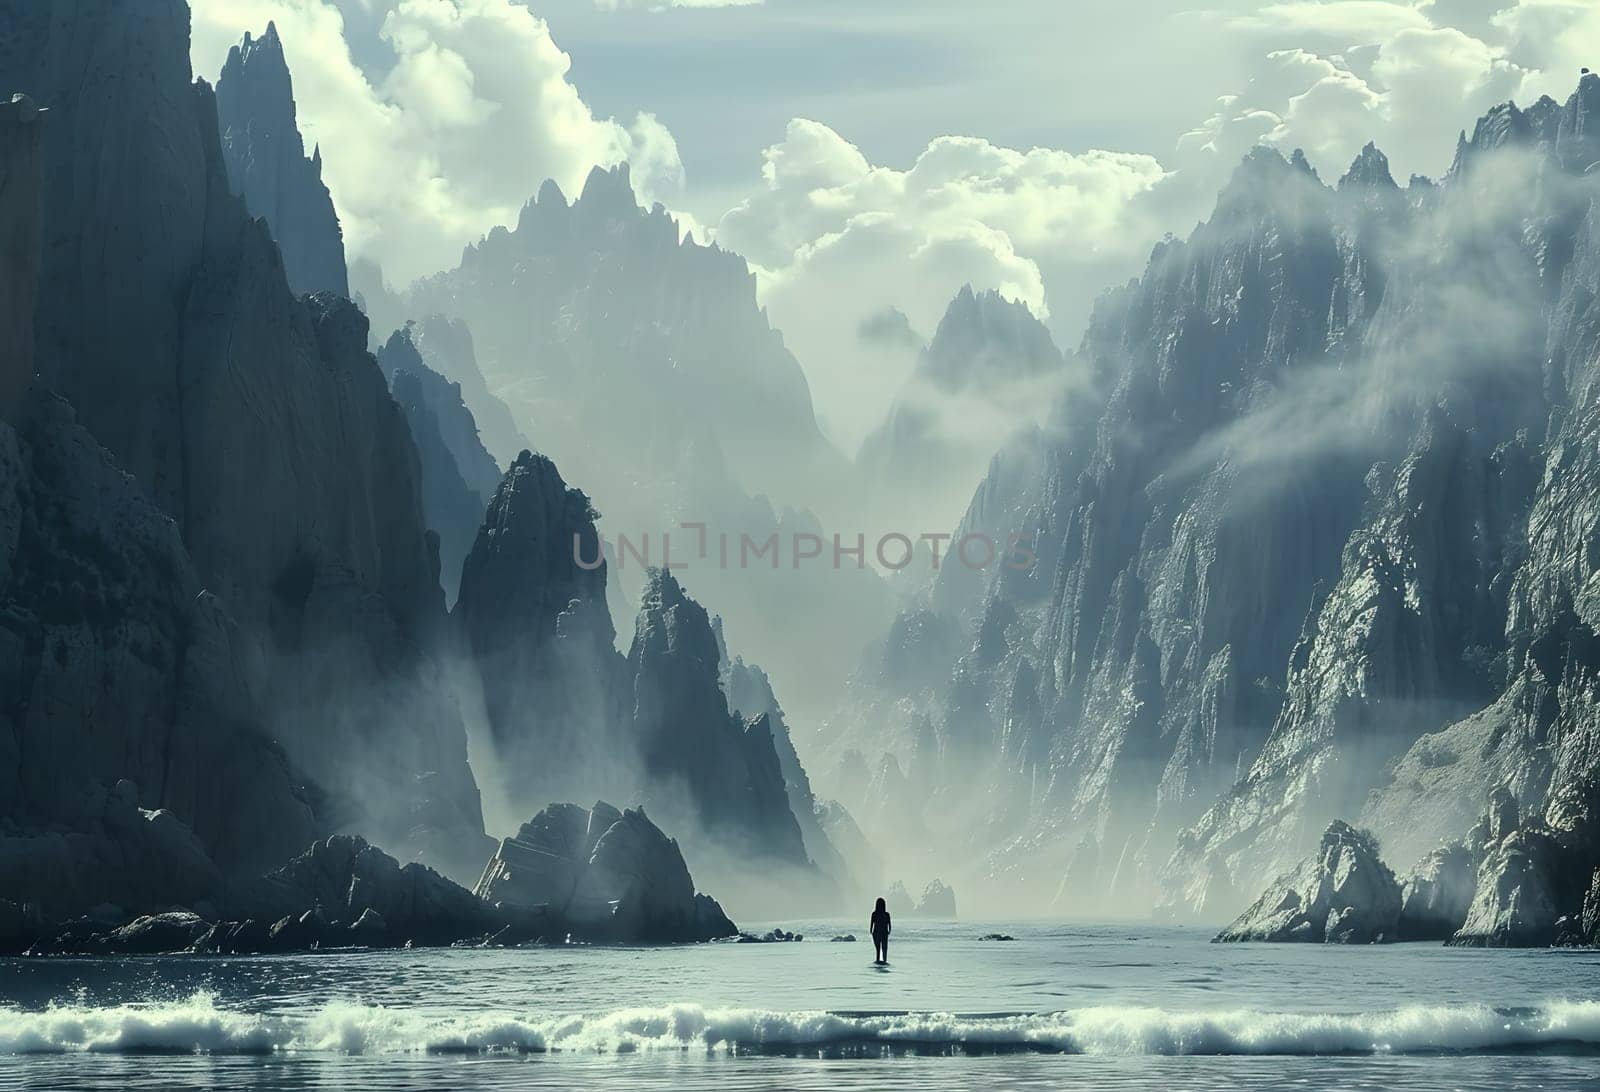 A person stands in the midst of the flowing water of the river, with majestic mountains in the background creating a breathtaking natural landscape